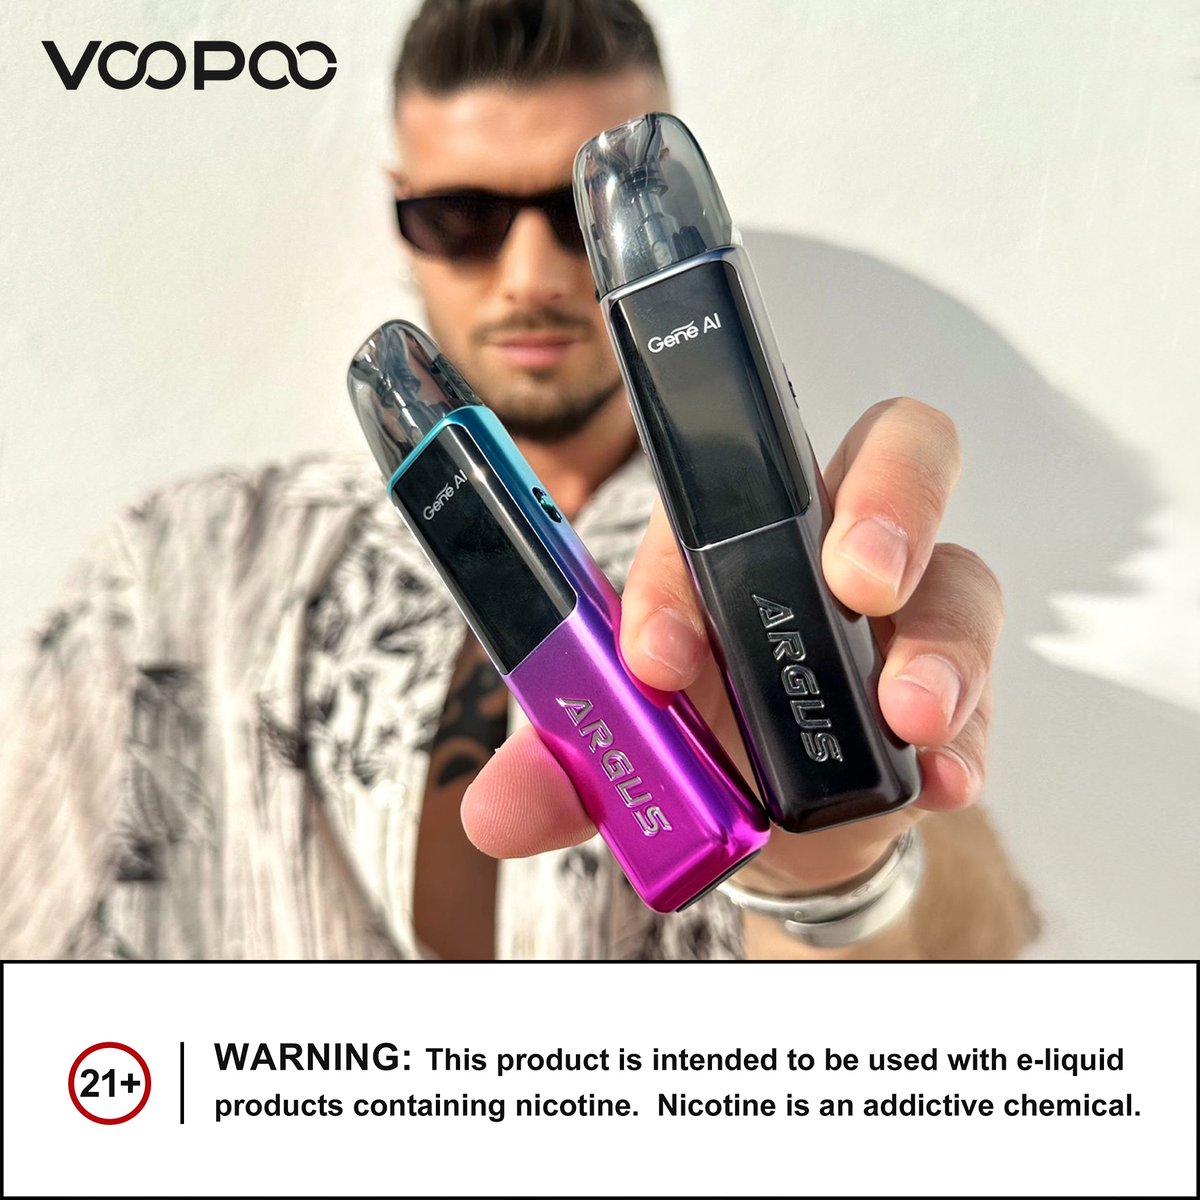 Want to experience the extraordinary Argus P2 and Argus G2? 💎 Come explore more with @antonio_diurno! It's time to get crazy! 🔥🚀

 #voopoo #argusp2 #argusg2 #voopoofamily #vapelife #VapeCommunity #newproduct